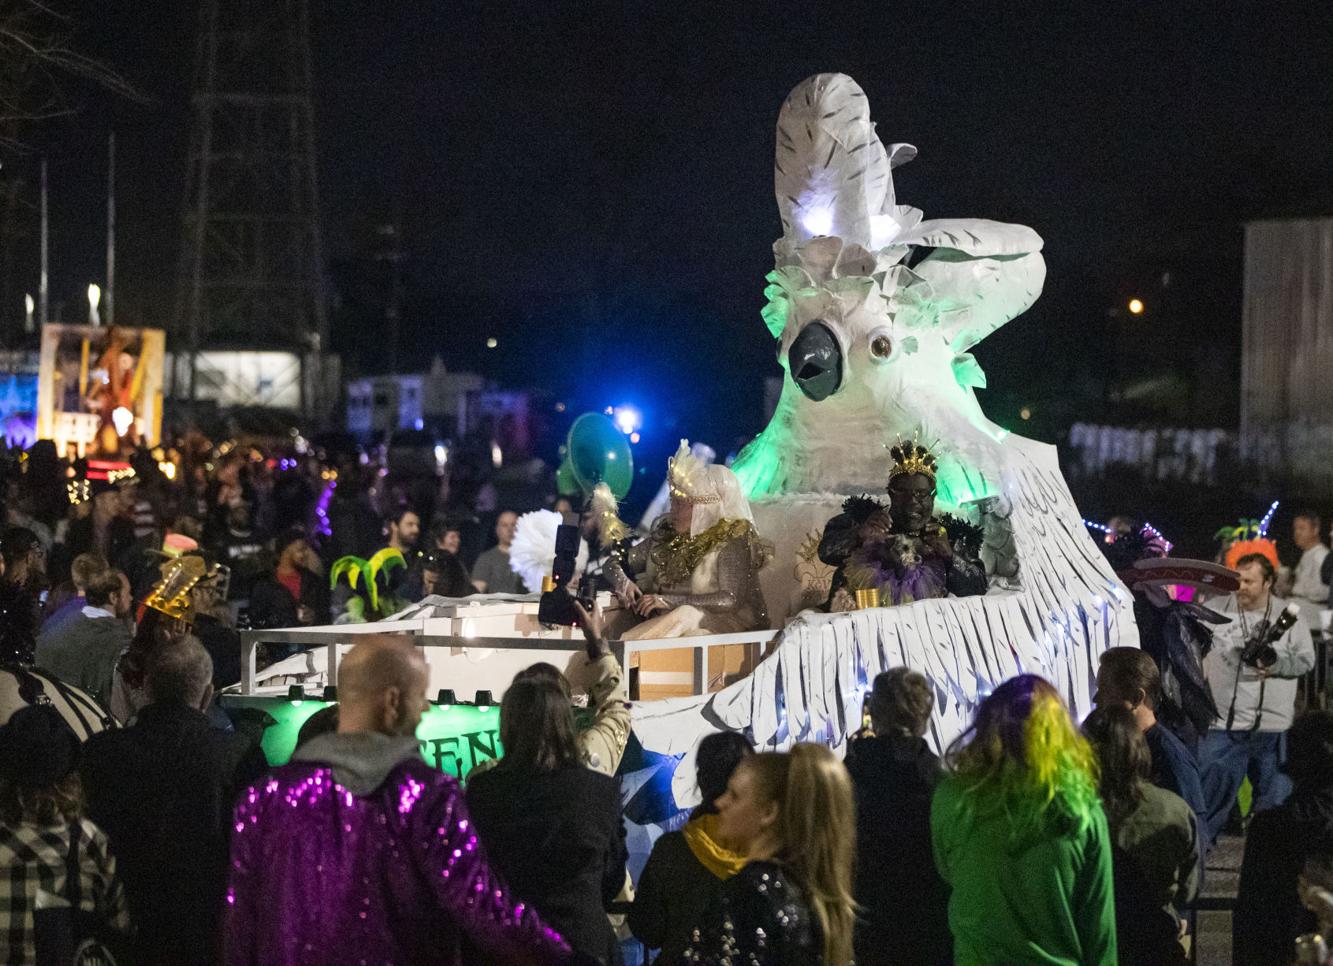 Photos Krewe du Vieux and krewedelusion wow the crowds like only